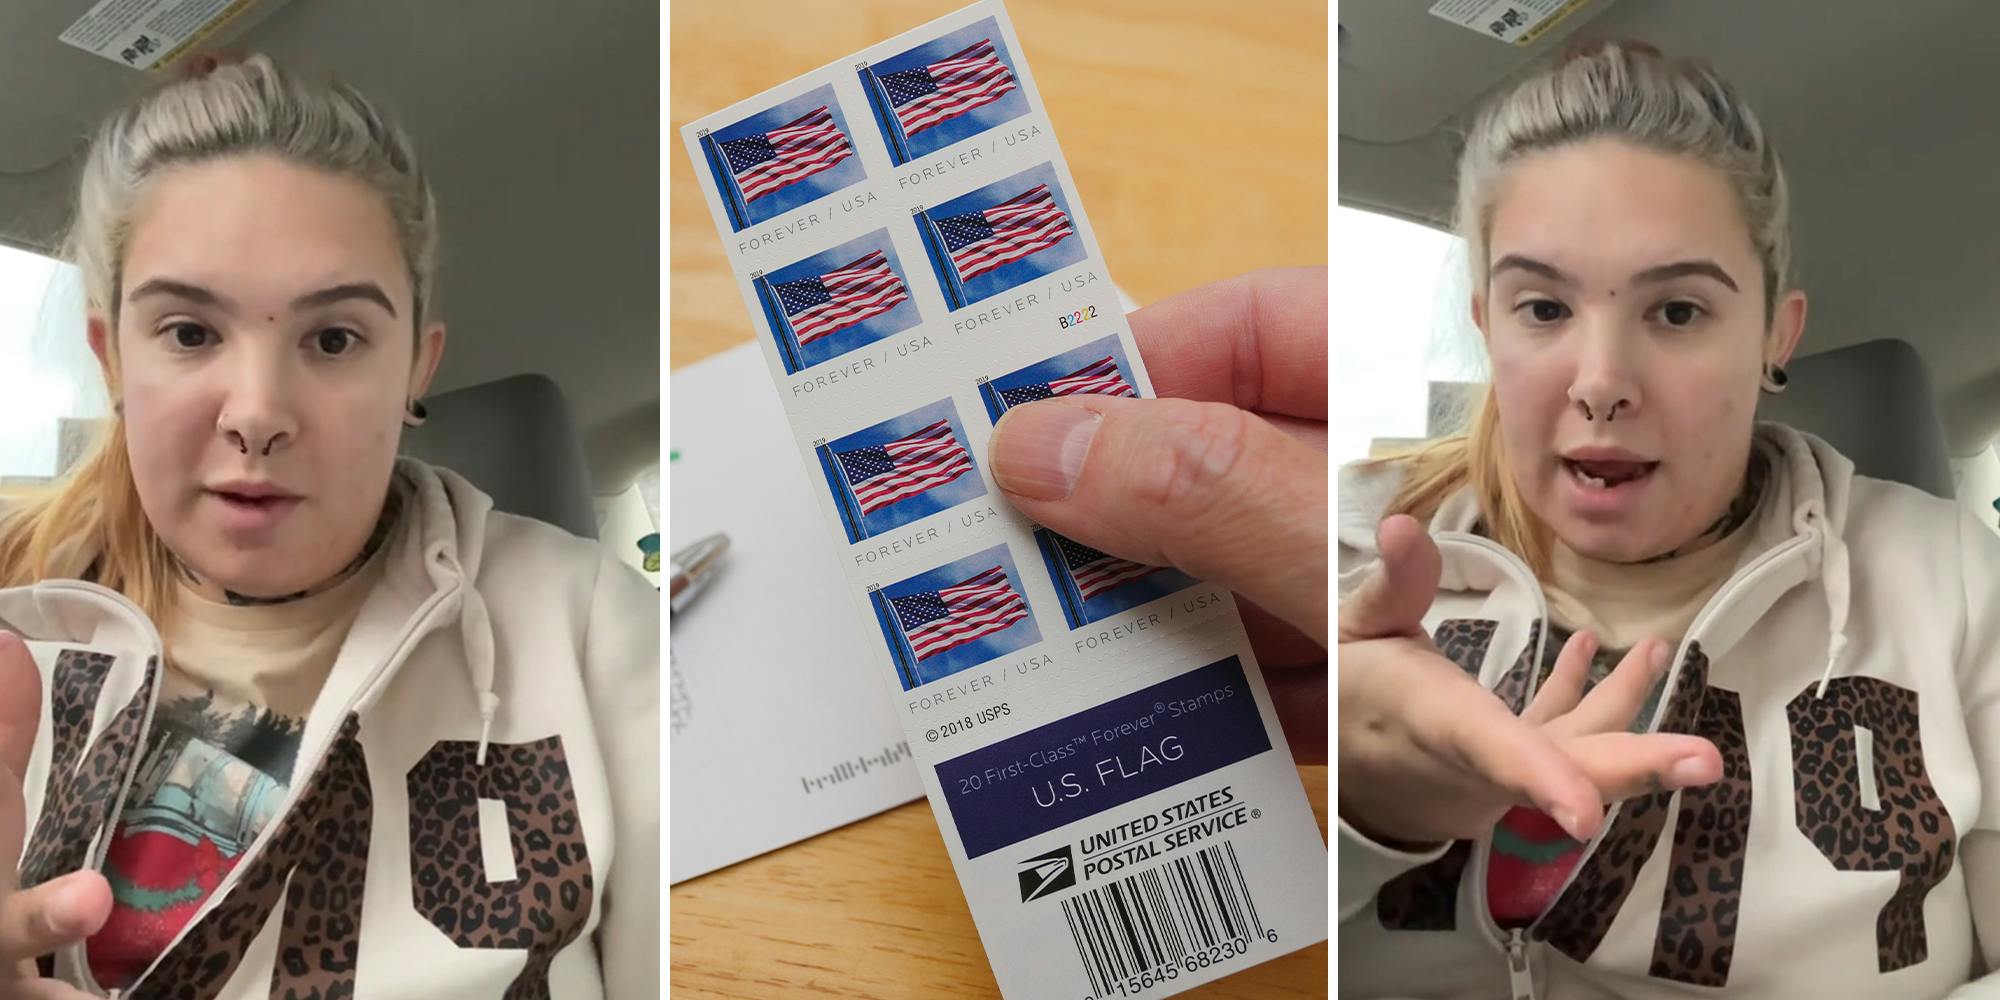 Shopper shares PSA on fake postage scam that could cost you money